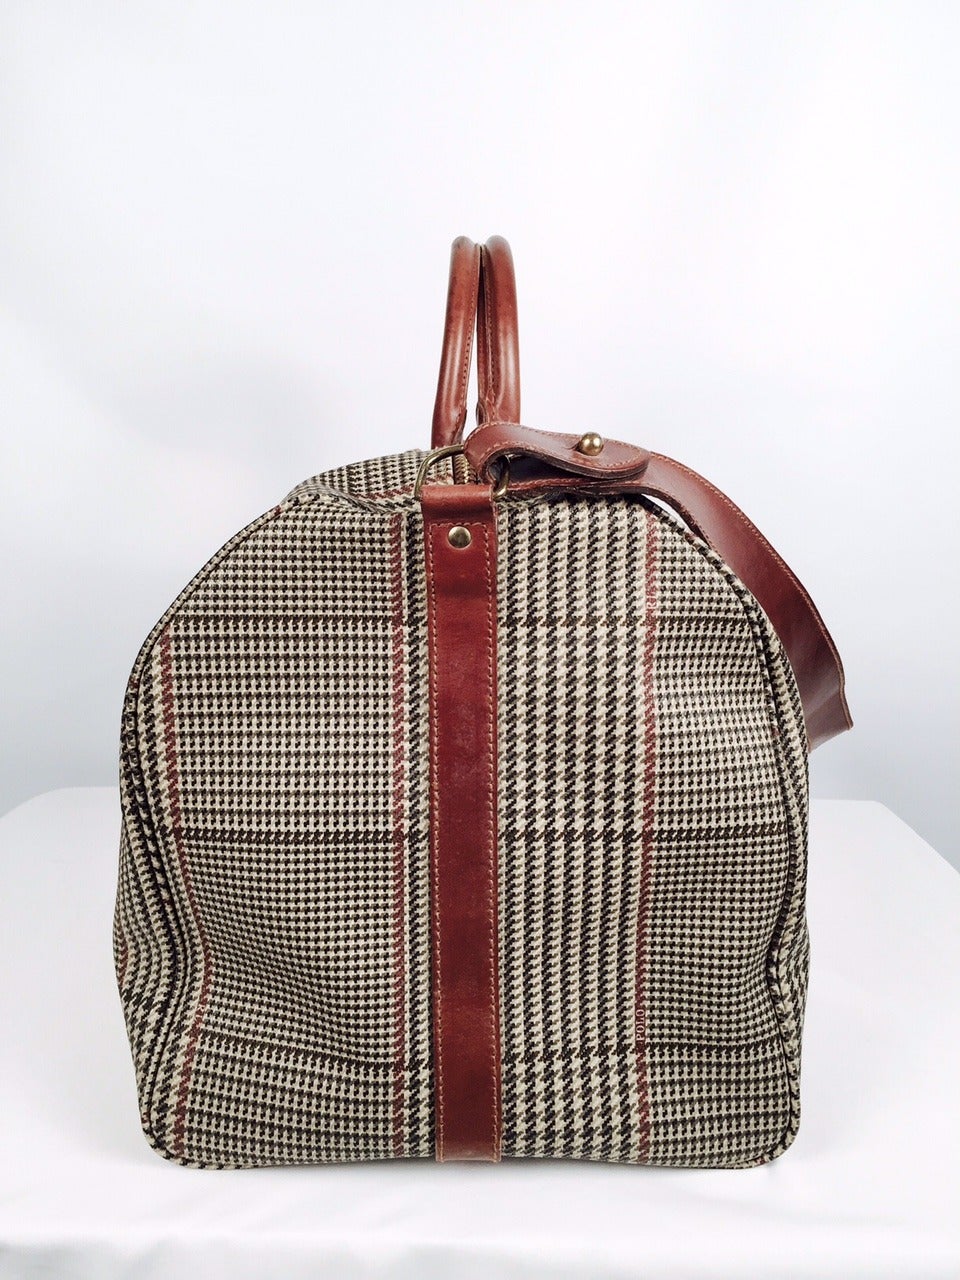 Welcome to the American Dream world of Ralph Lauren!  Rare, vintage Polo herringbone plaid weekender shoulder duffel bag whispers the elegance and timeless style and aura of polo playing, yachting, sailing, horseback riding, and country clubbing. 